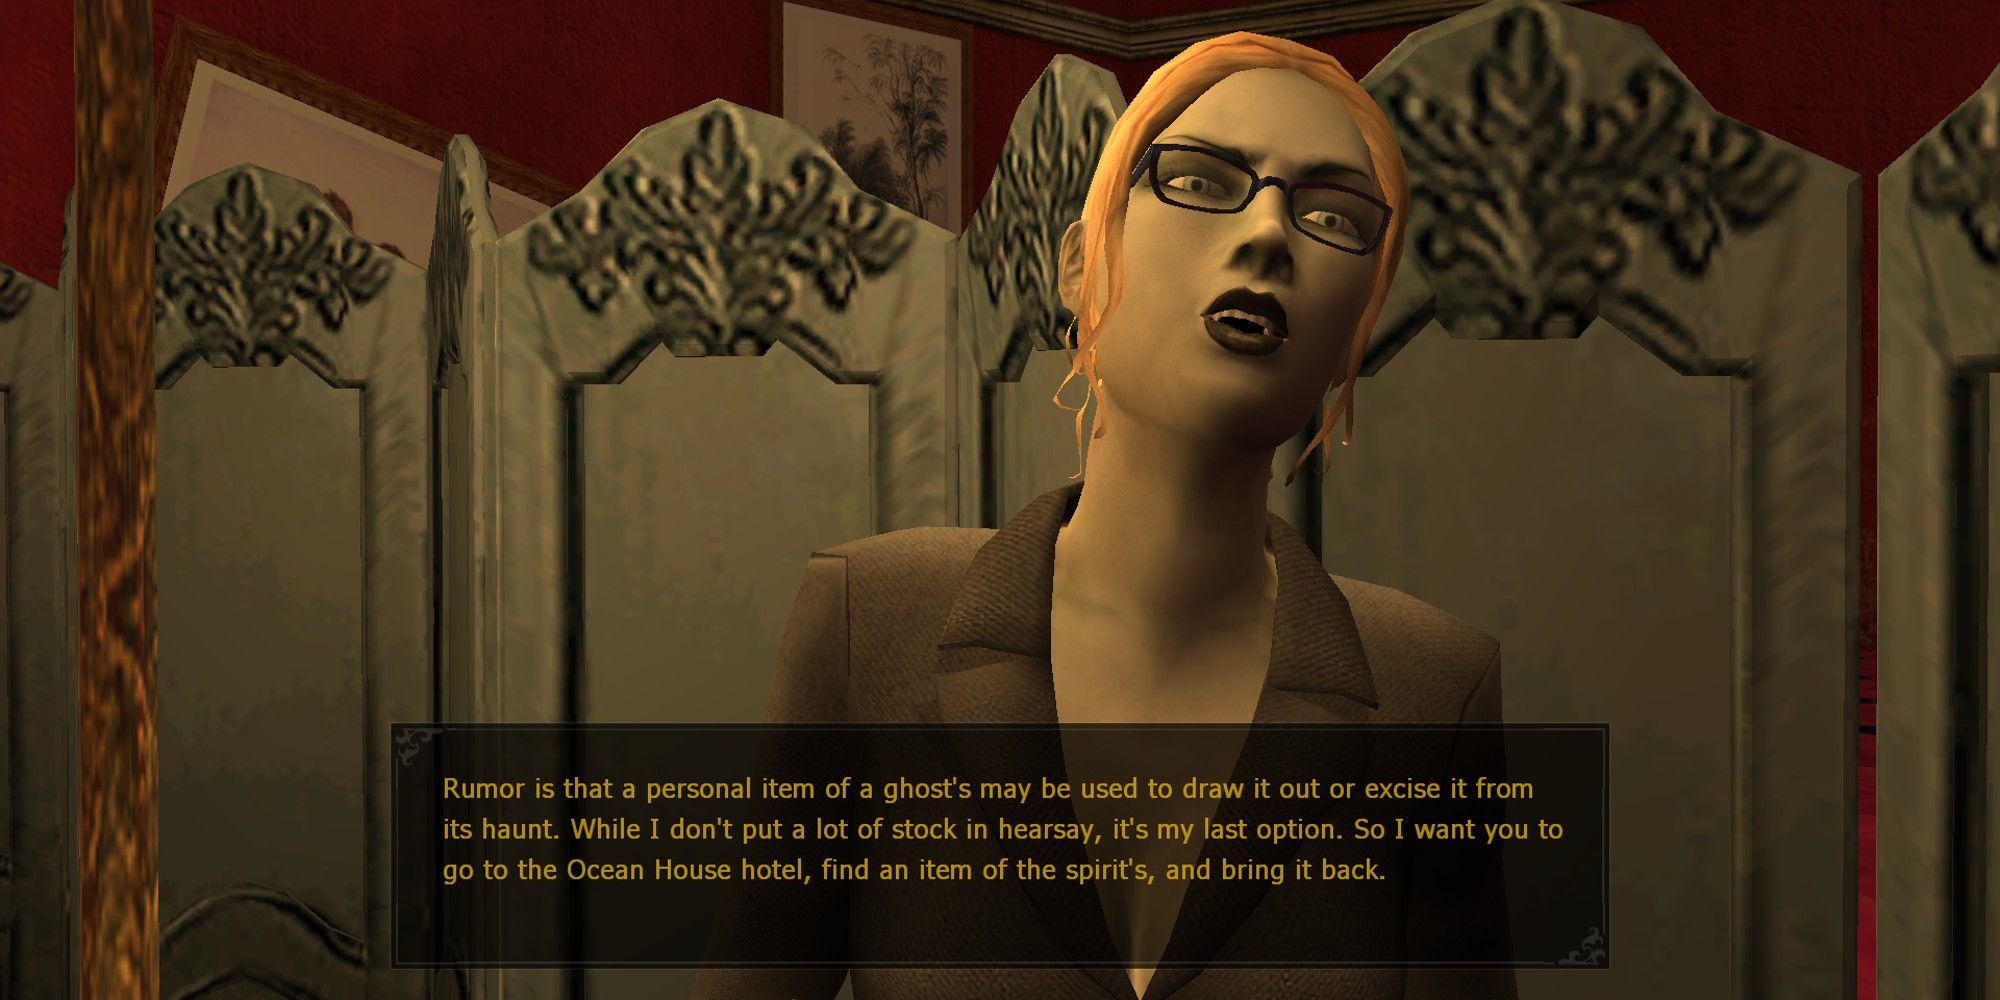 Therese assigning "The Ghost Haunts At Midnight" quest in Vampire: The Masquerade - Bloodlines